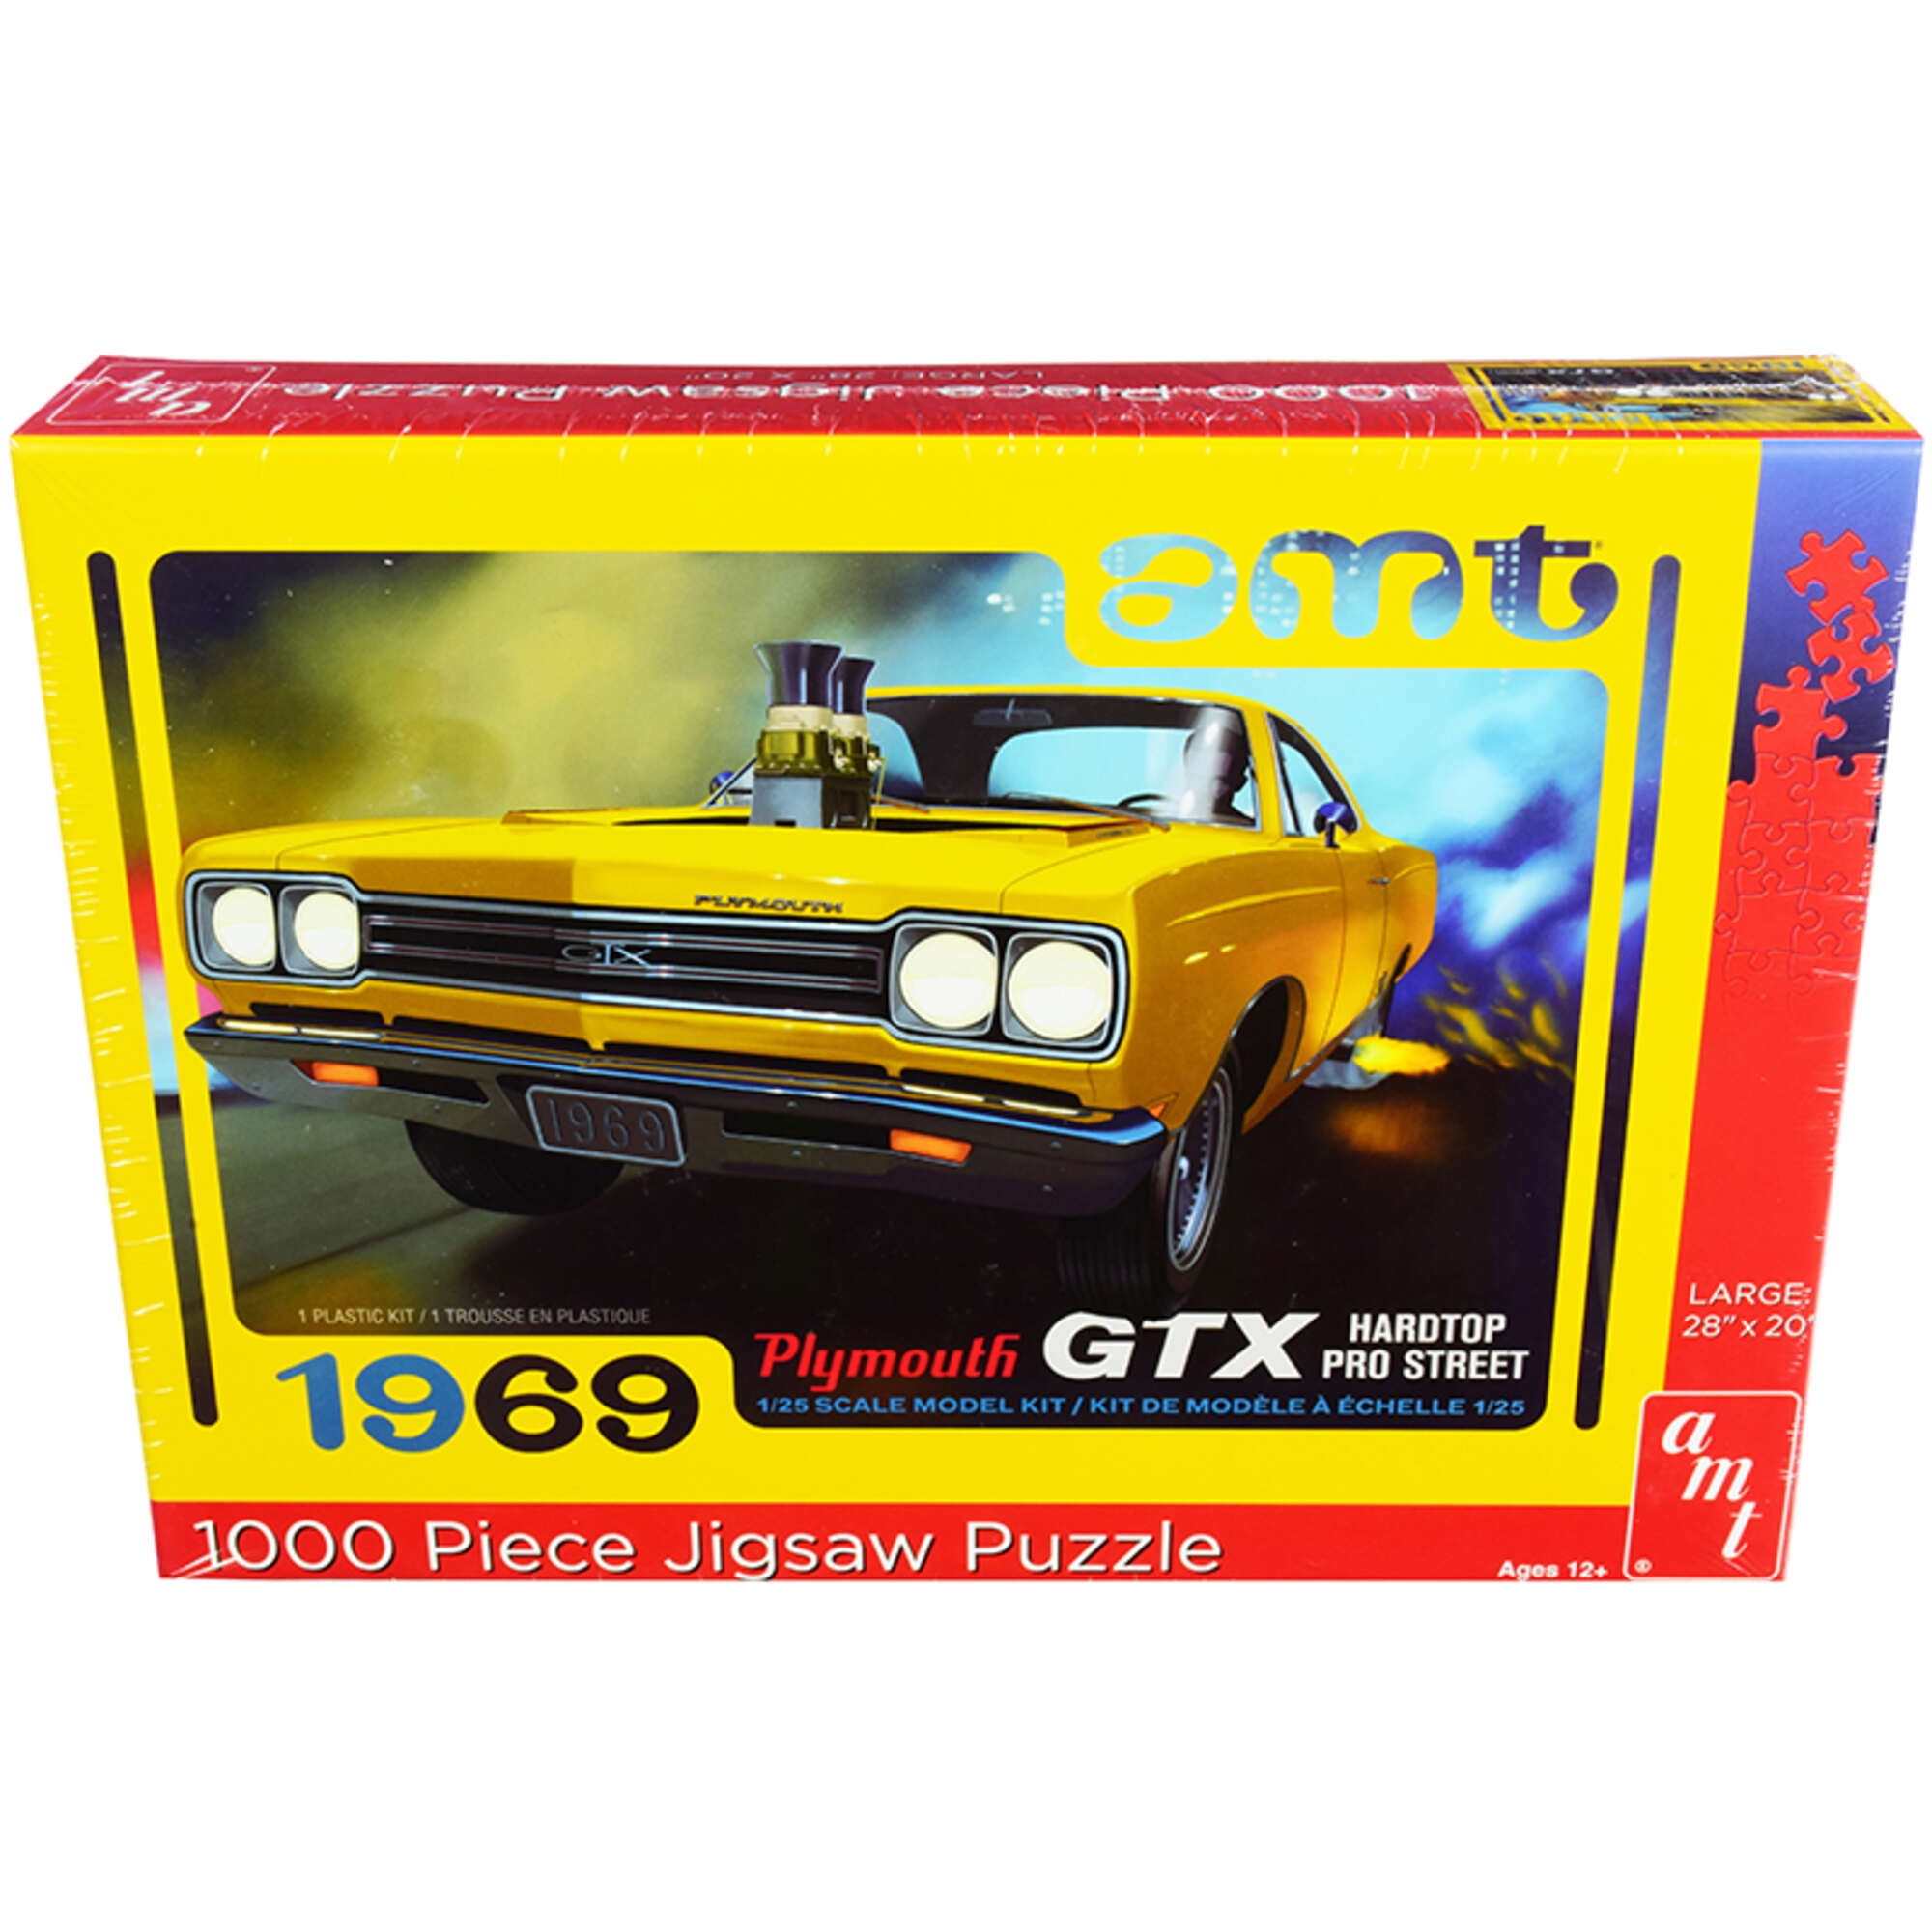 Picture of AMT AWAC009-GTX Jigsaw Puzzle 1969 Plymouth GTX Hardtop Pro Street Model Car Box - 1000 Piece